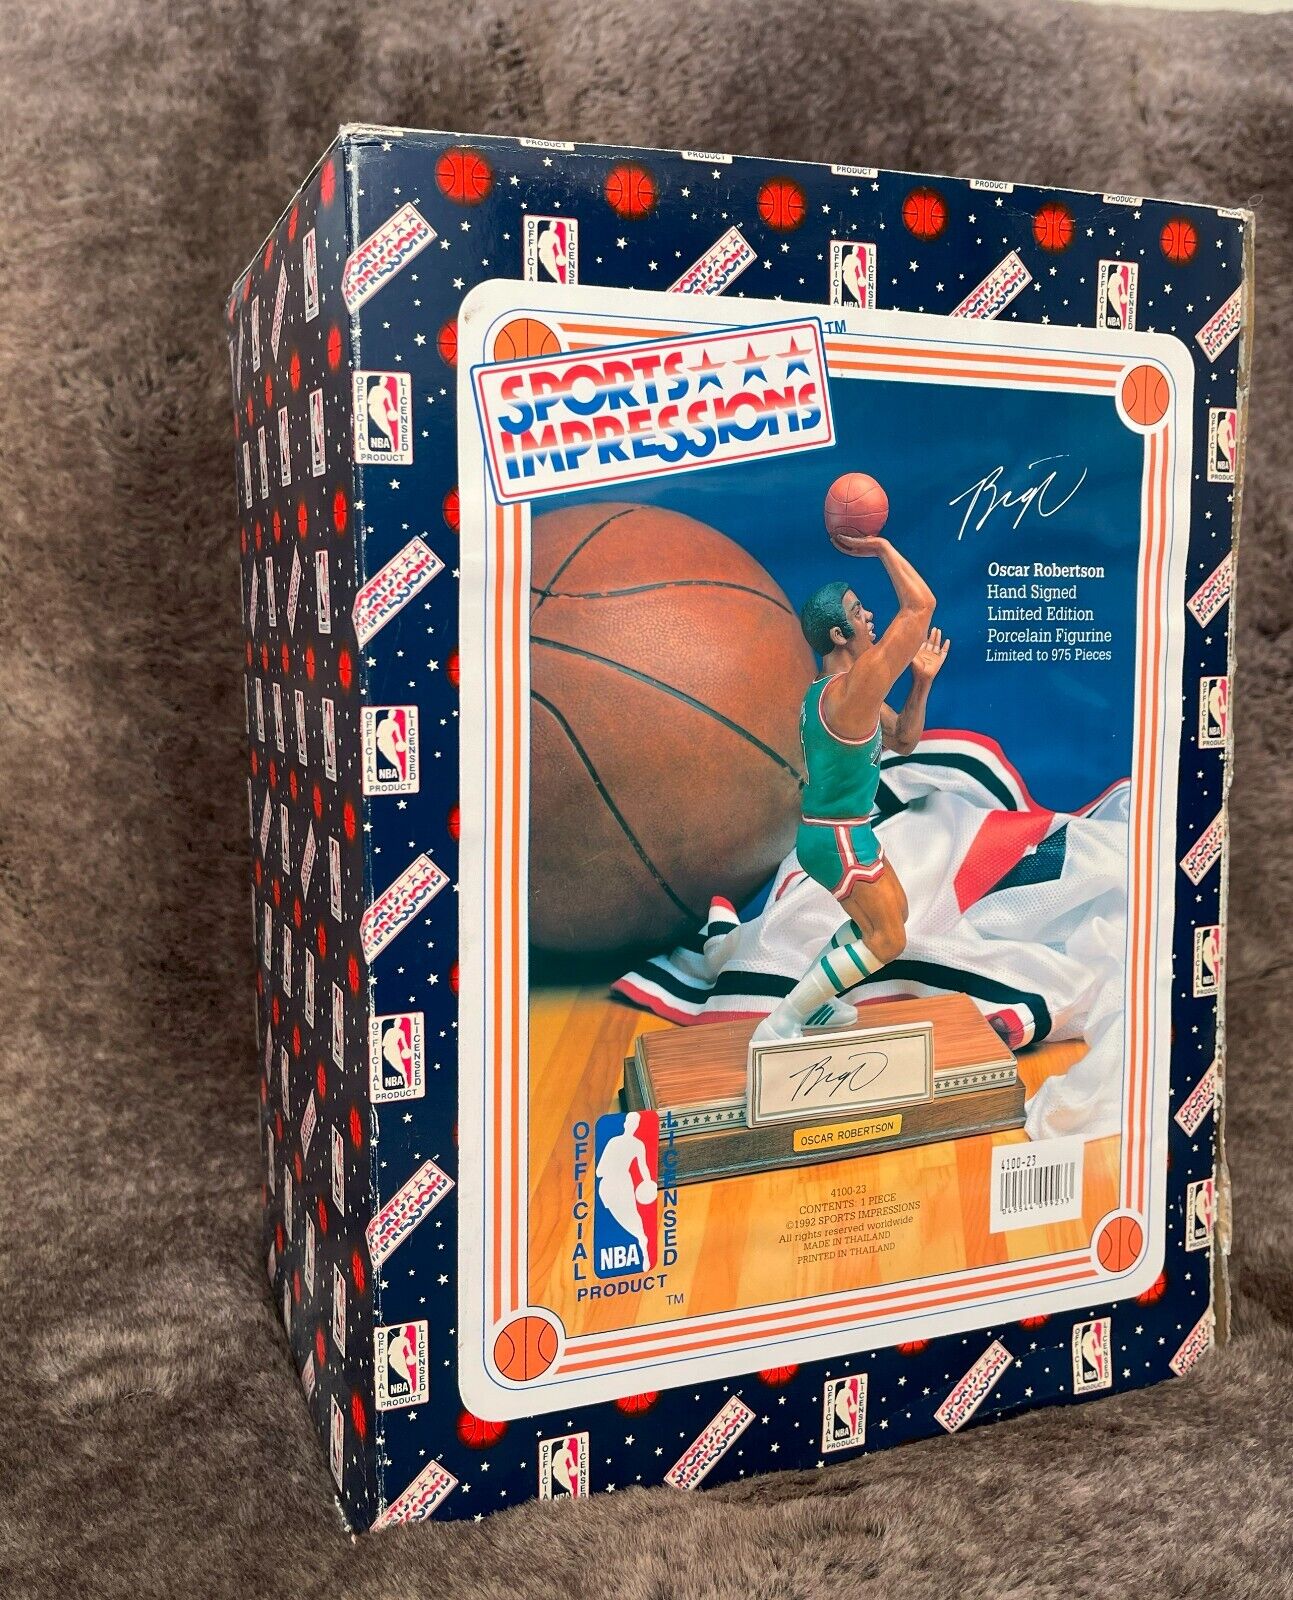 Oscar Robertson Signed Limited Edition Figurine. #369 of 950 -Sports Impressions